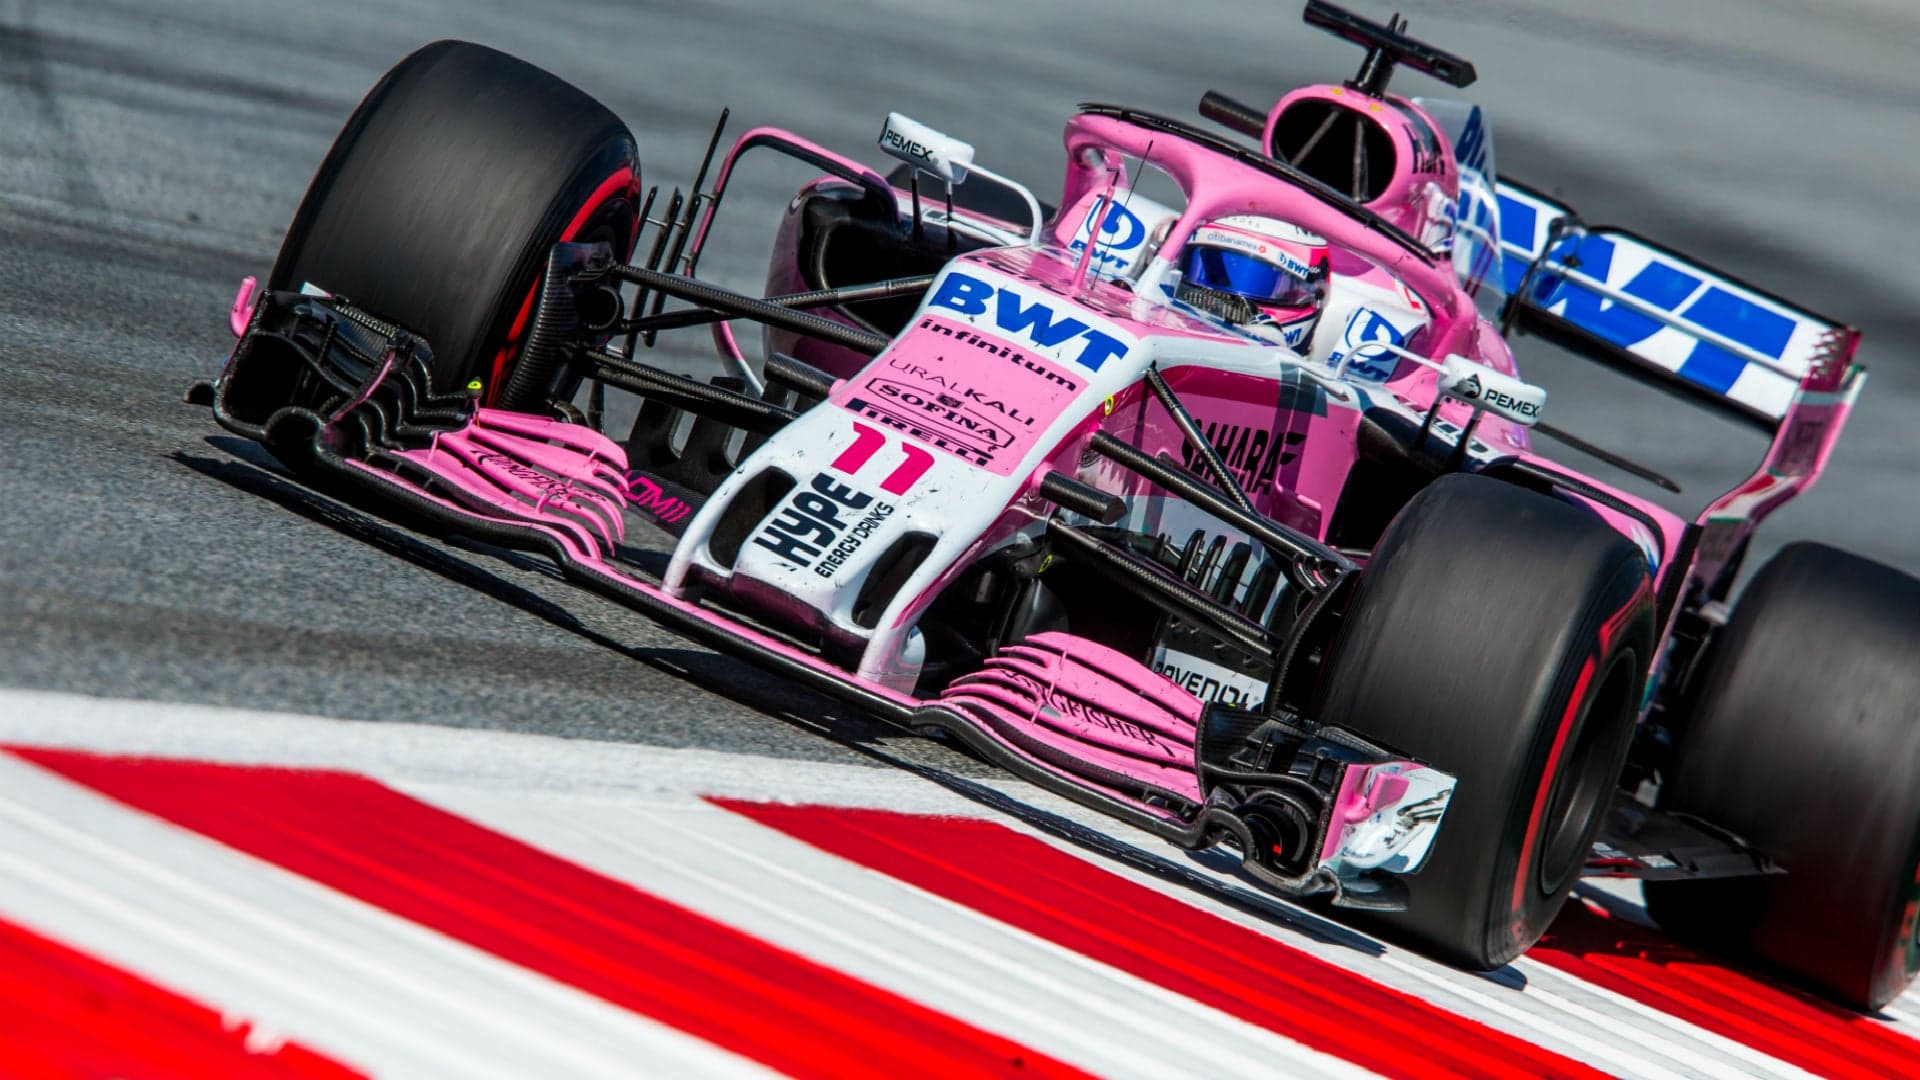 Force India Name Axed, Will Enter 2019 as Racing Point F1